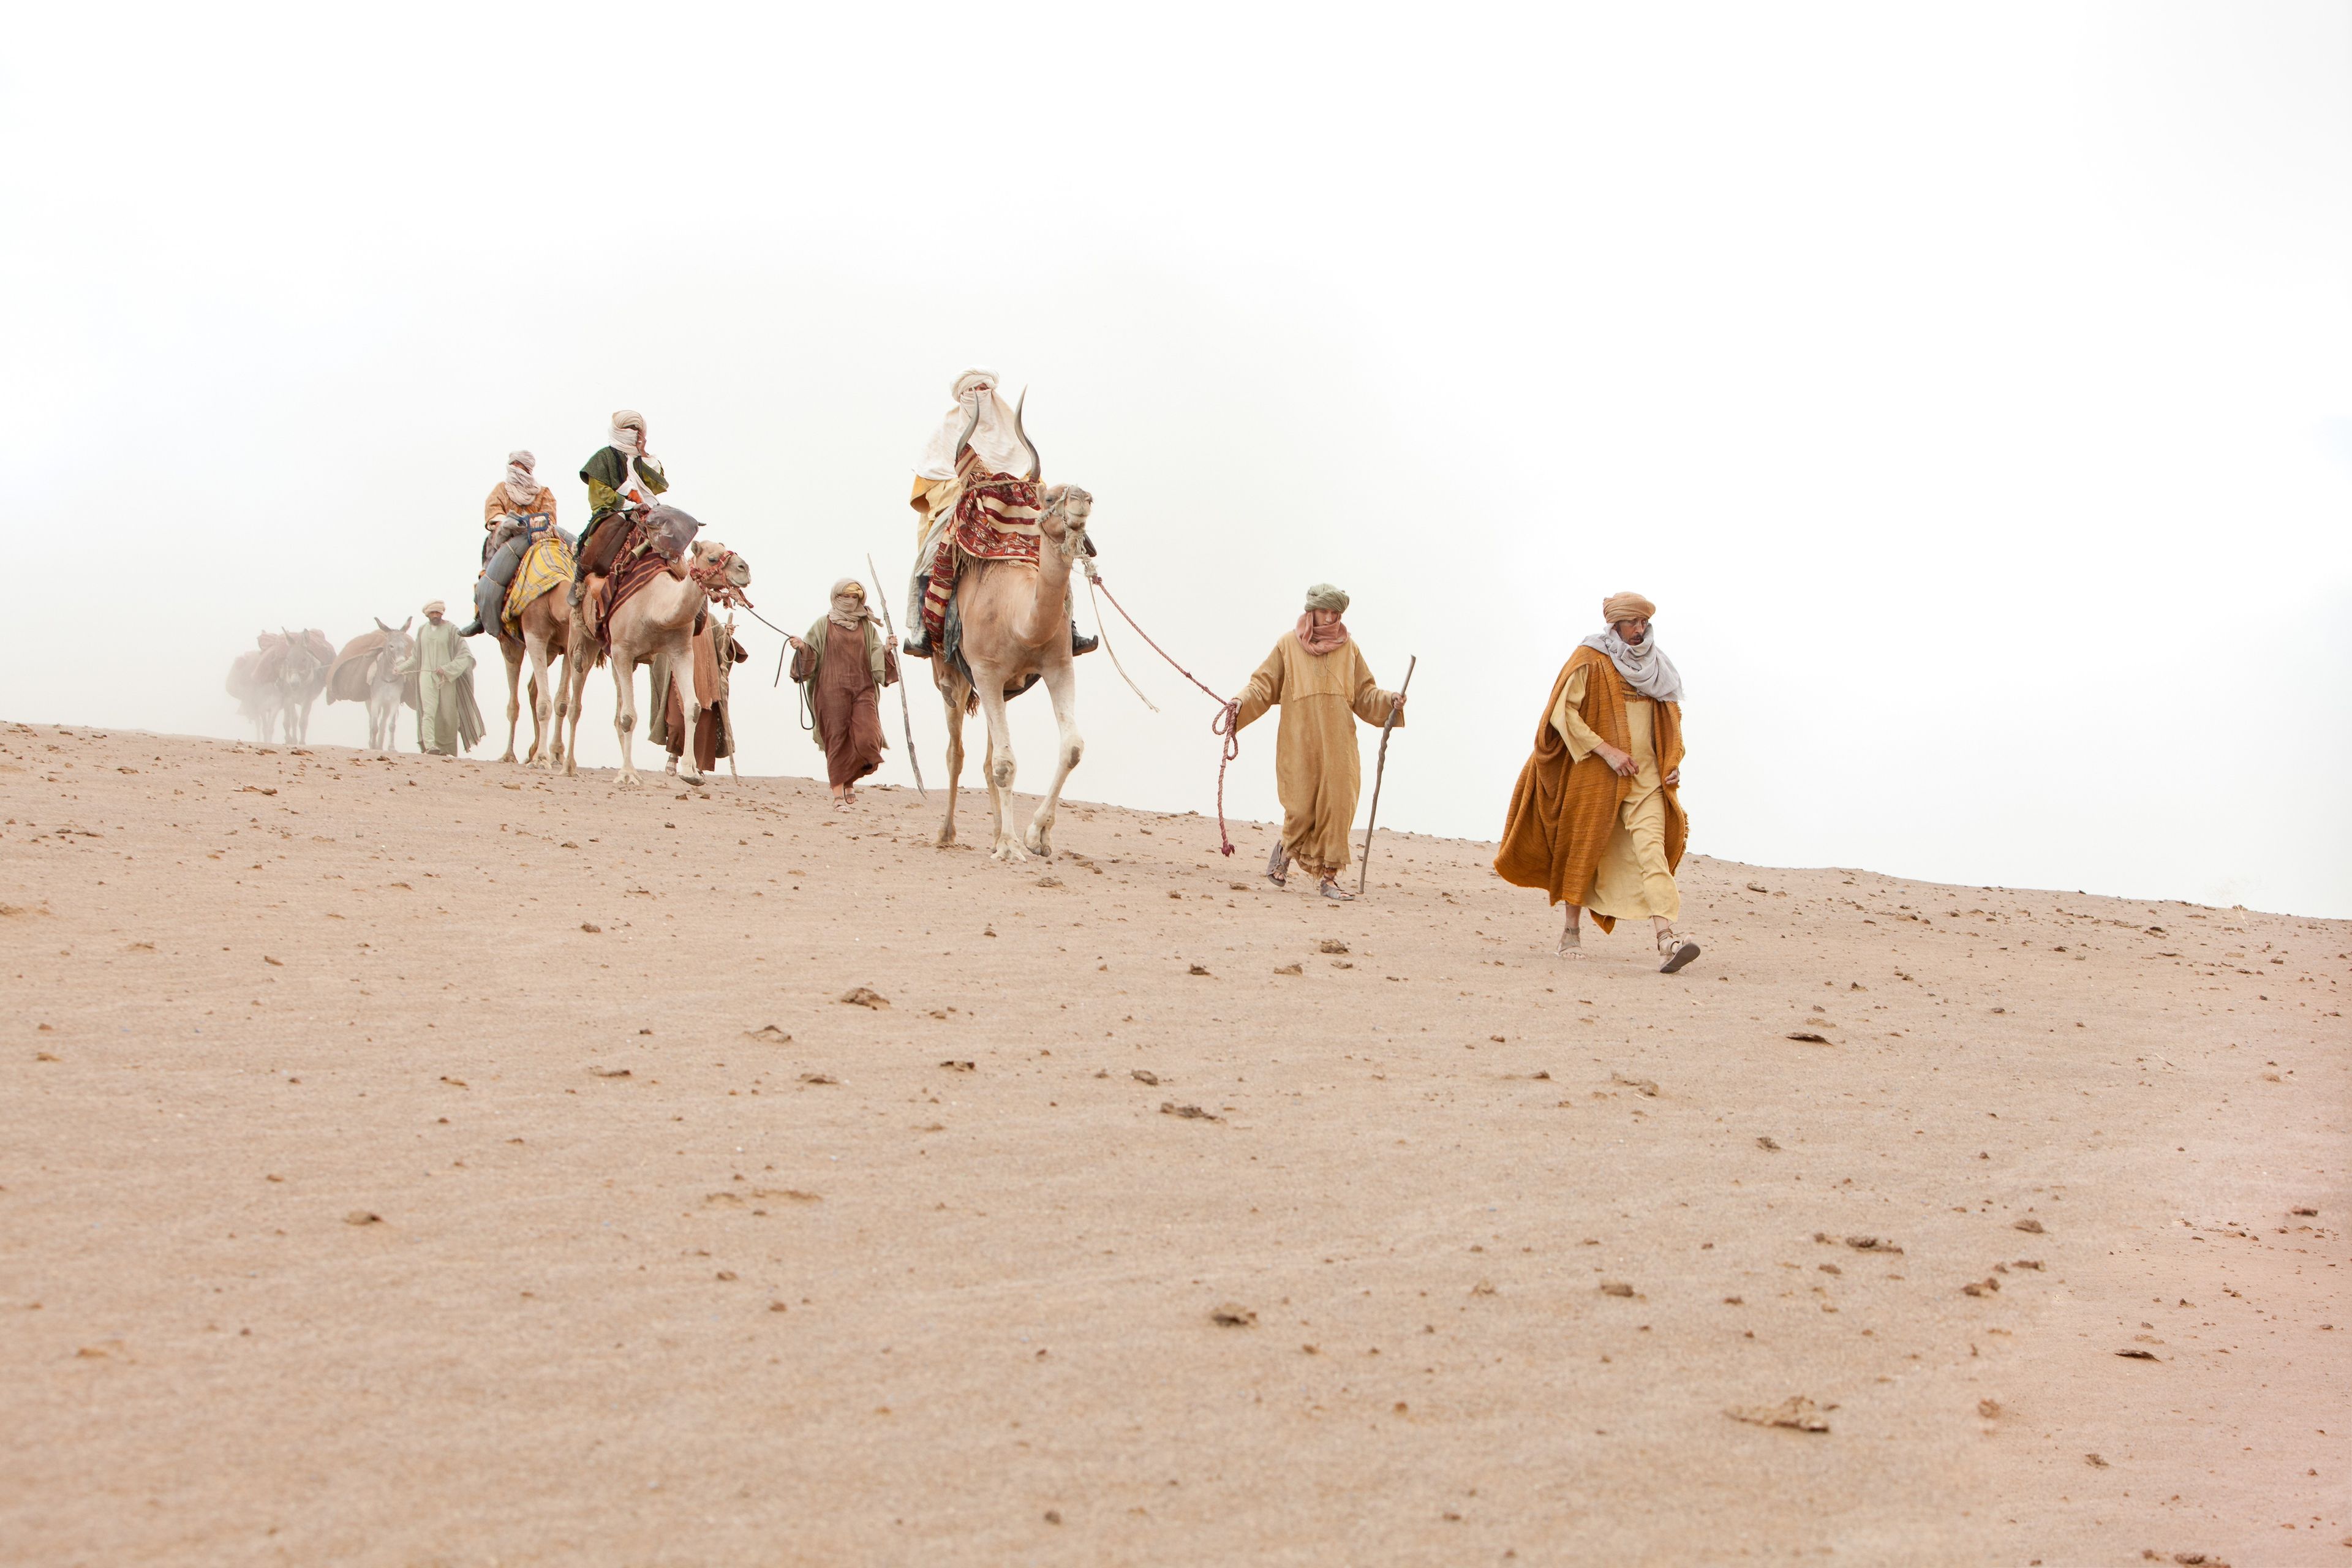 The Wise Men ride their camels over the desert sand.